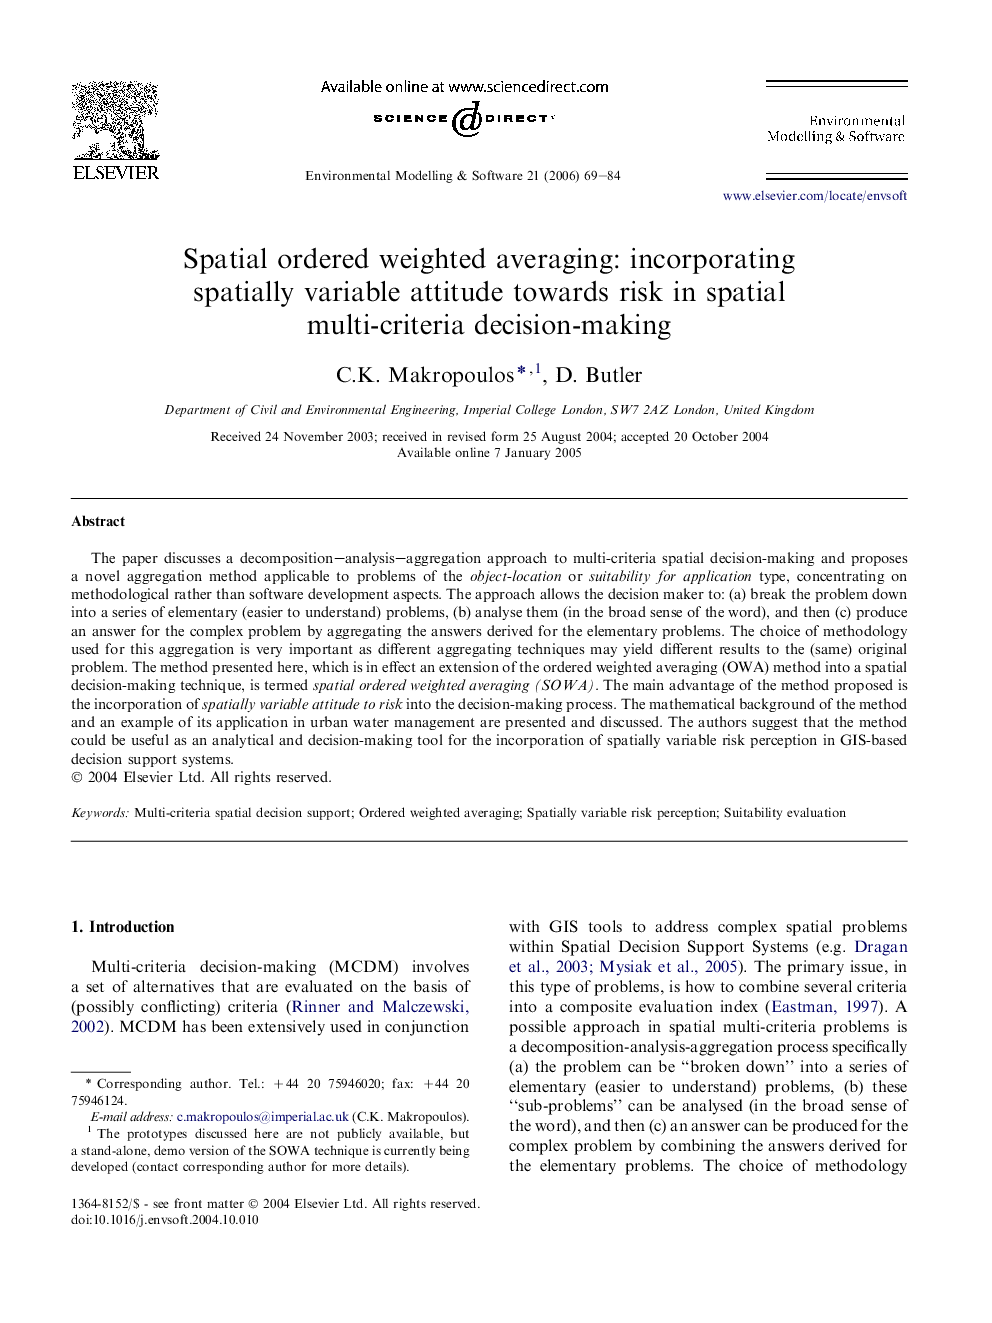 Spatial ordered weighted averaging: incorporating spatially variable attitude towards risk in spatial multi-criteria decision-making